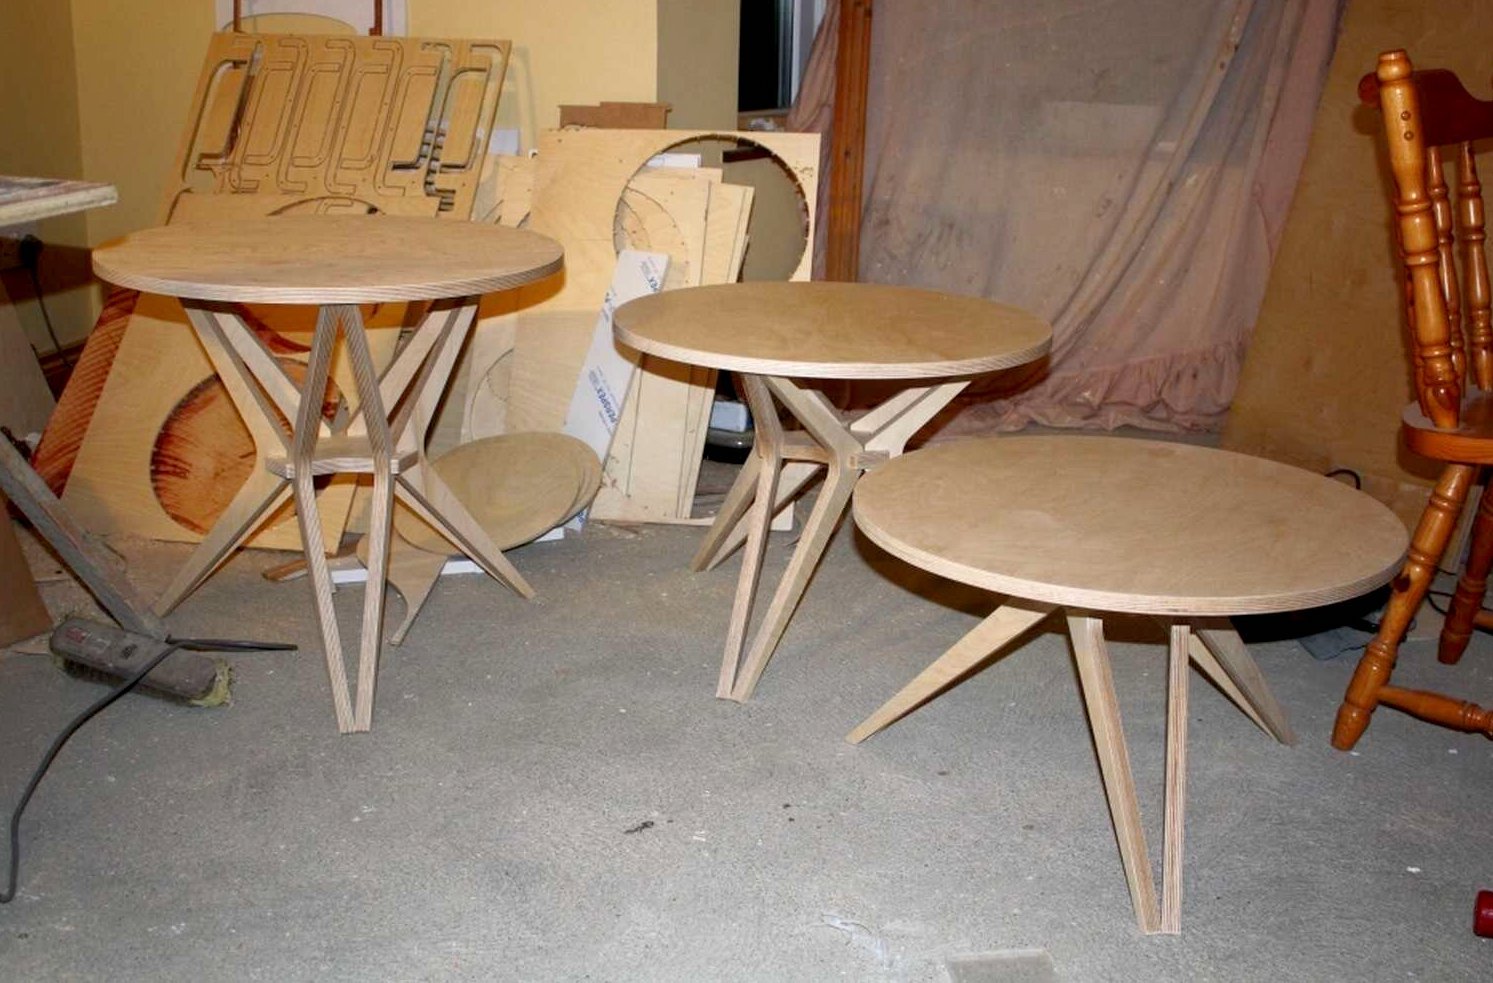 plywood-tables-created-with-the-jbec-cnc-router-05.jpg